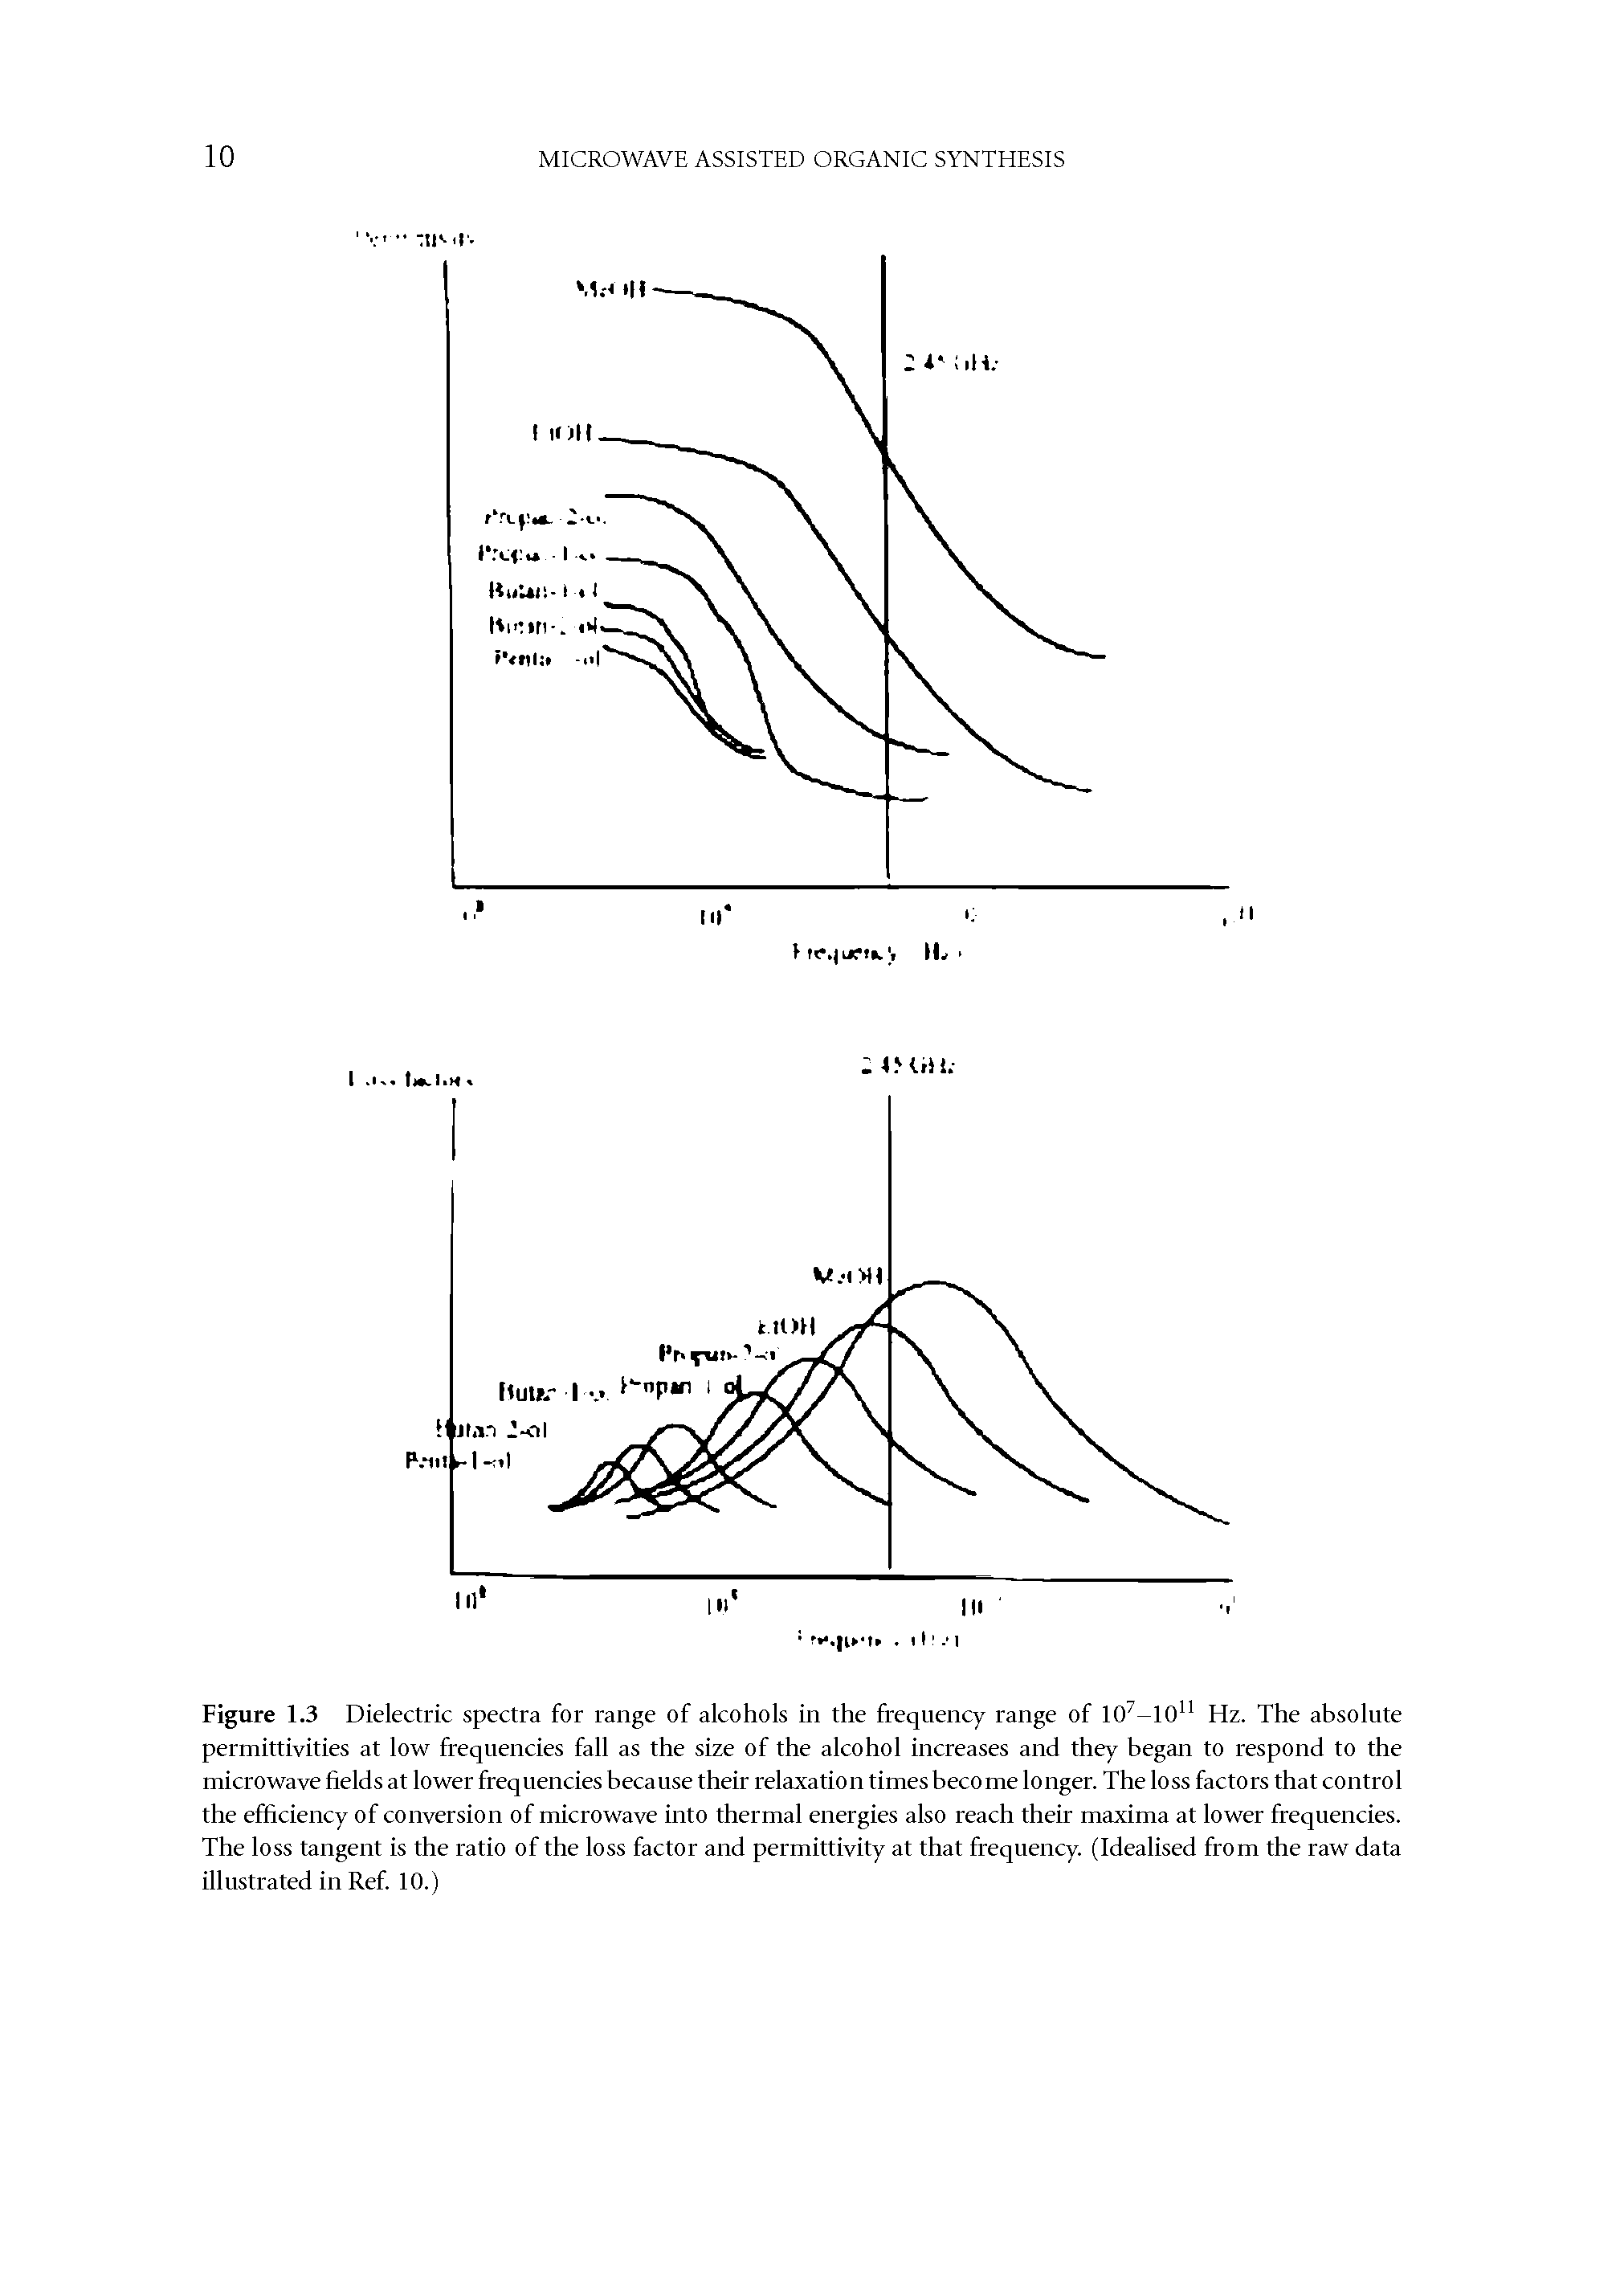 Figure 1.3 Dielectric spectra for range of alcohols in the frequency range of 107-10n Hz. The absolute permittivities at low frequencies fall as the size of the alcohol increases and they began to respond to the microwave fields at lower frequencies because their relaxation times become longer. The loss factors that control the efficiency of conversion of microwave into thermal energies also reach their maxima at lower frequencies. The loss tangent is the ratio of the loss factor and permittivity at that frequency. (Idealised from the raw data illustrated in Ref. 10.)...